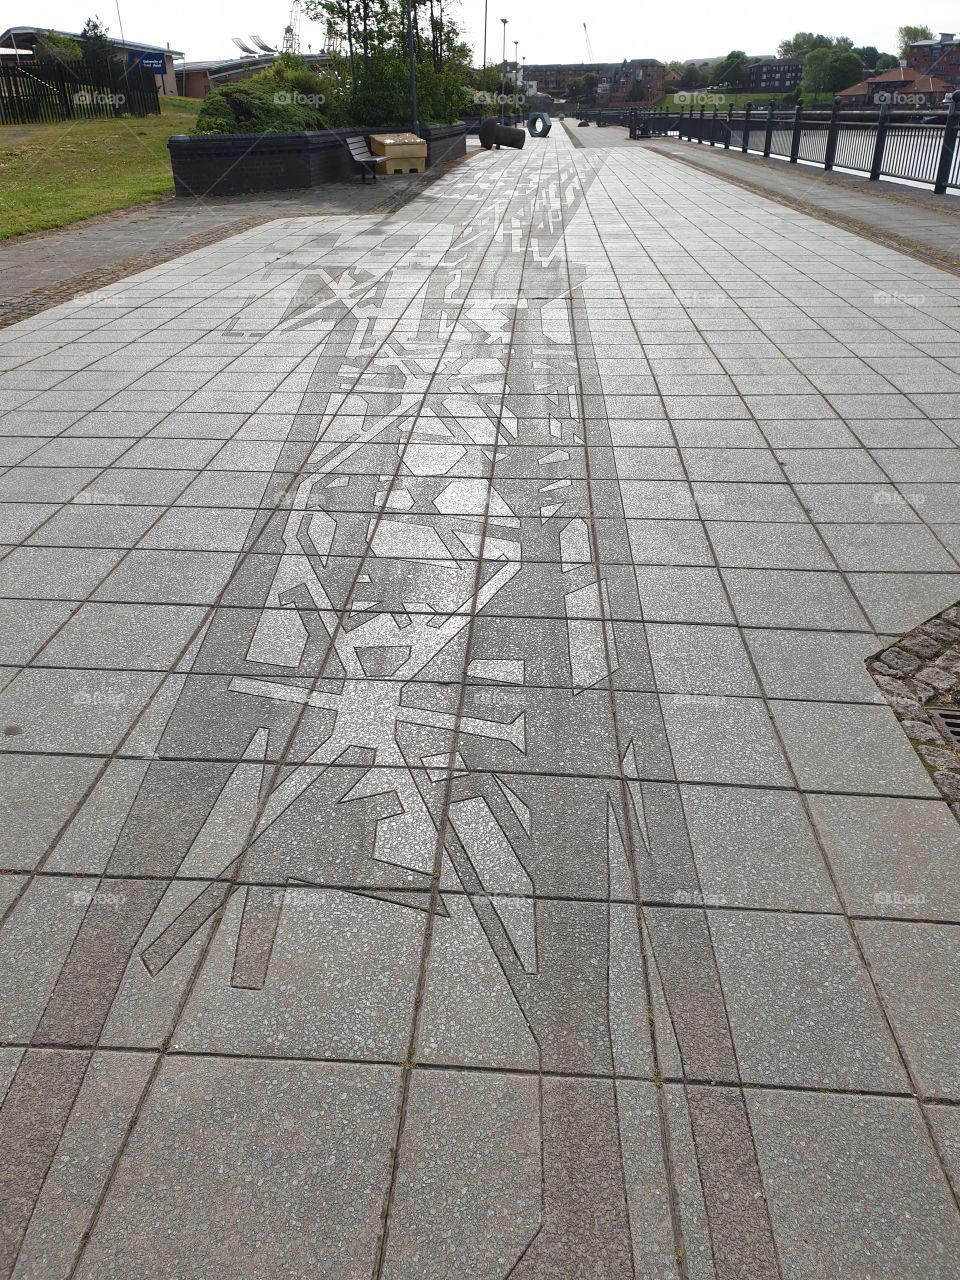 detailed pattern on paved walkway.